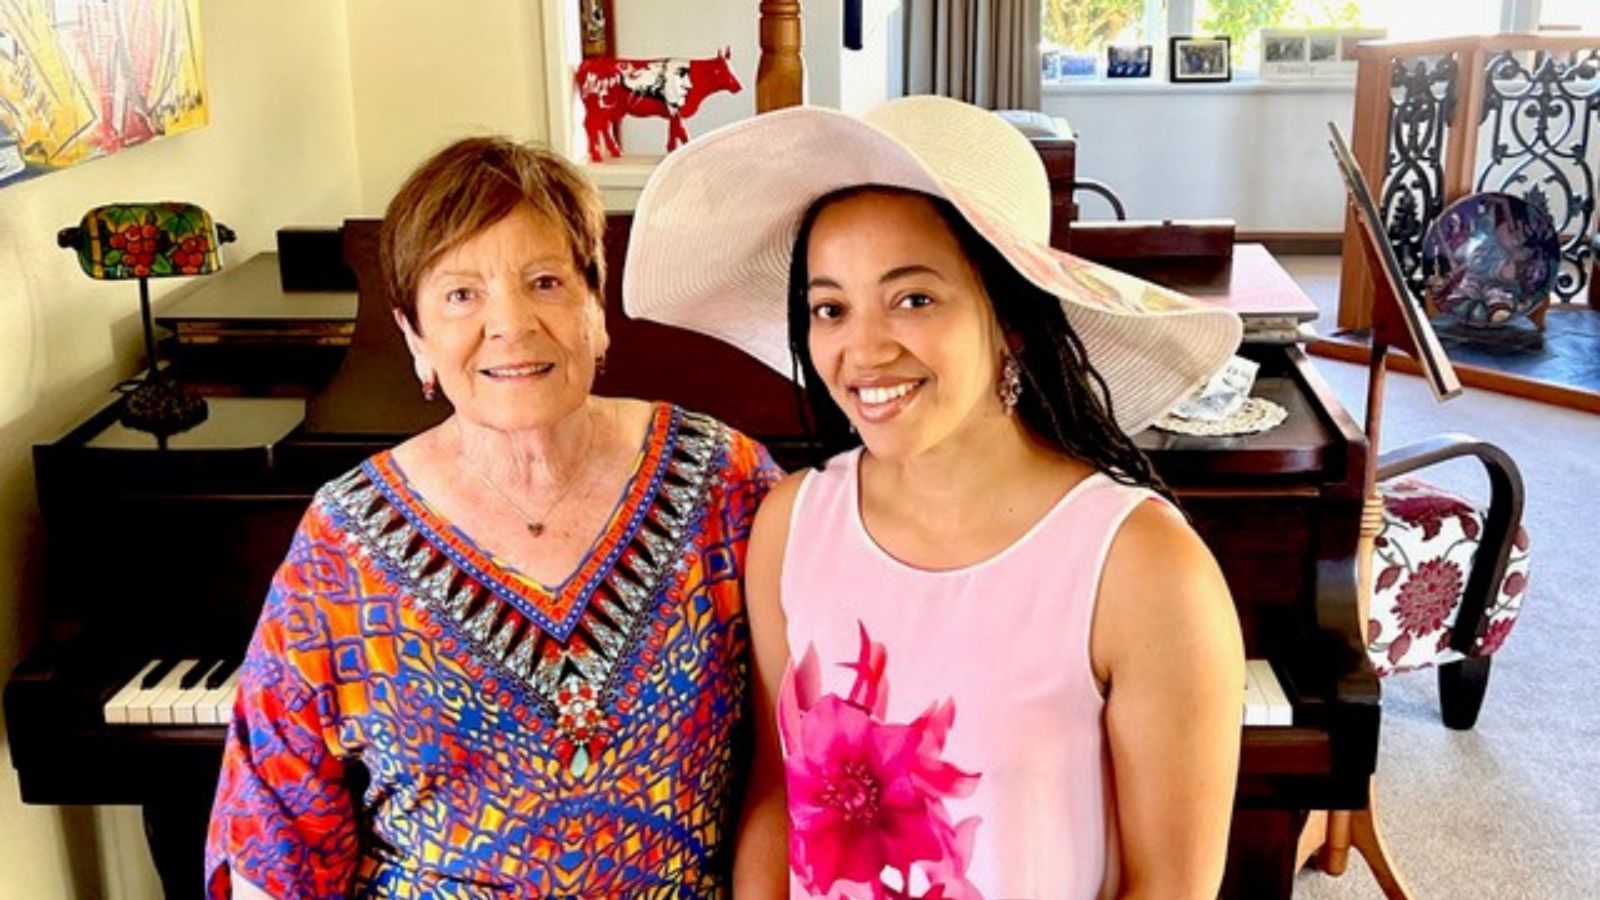 Two women, one older with short hair and a bright pink floral top, the other dark-skinned wearing a large hat, with black hair, wearing a pale pink singlet with a dark pink flower on it